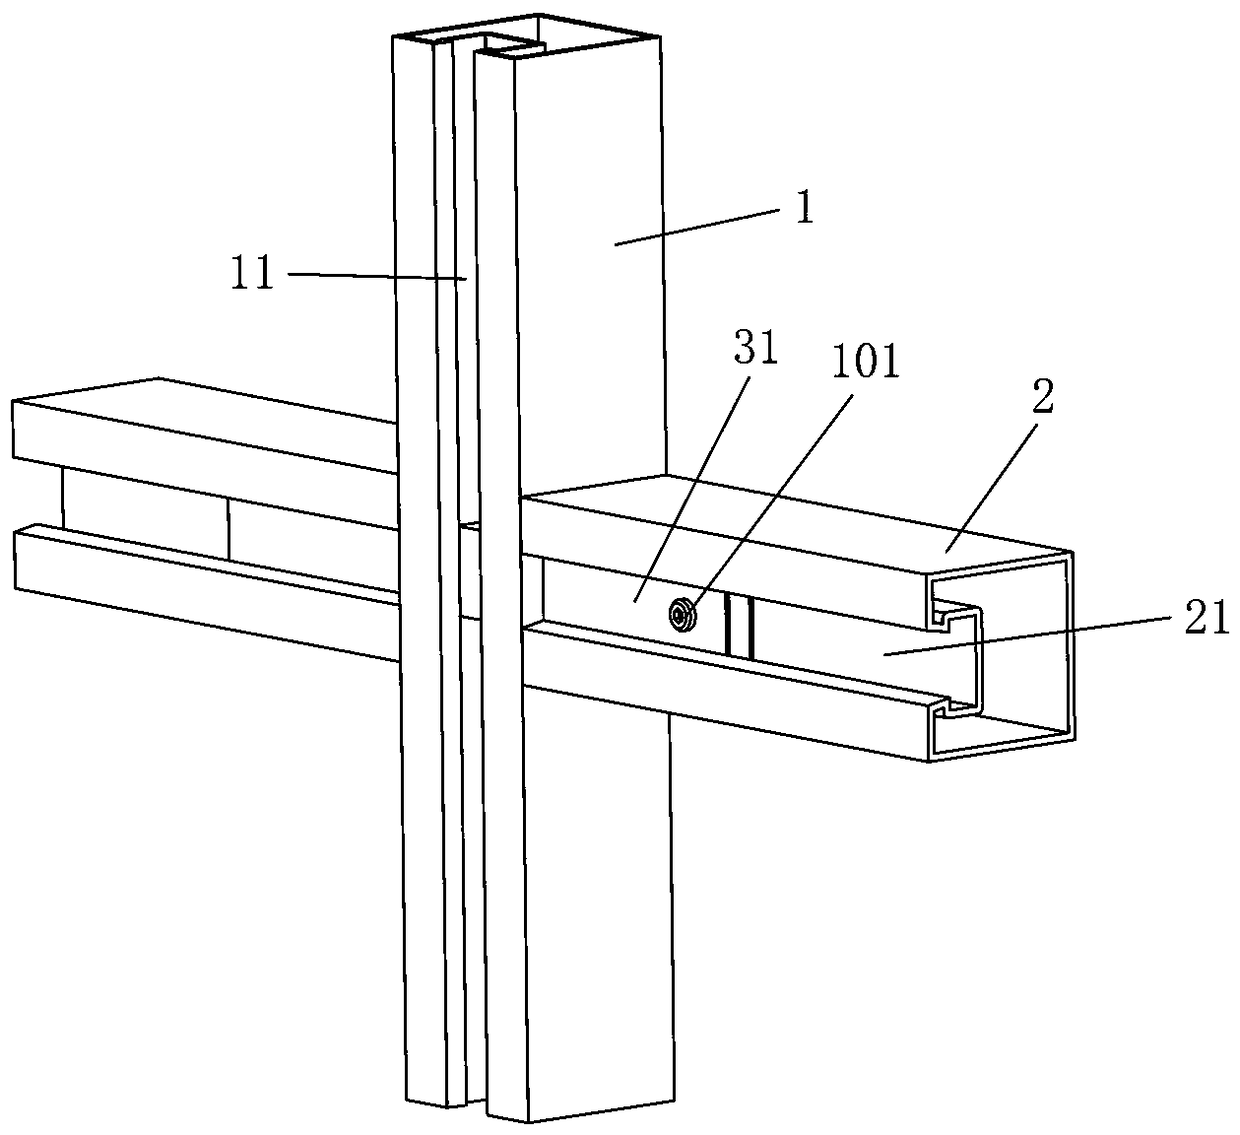 Curtain wall keel connection structure based on inner expansion groove